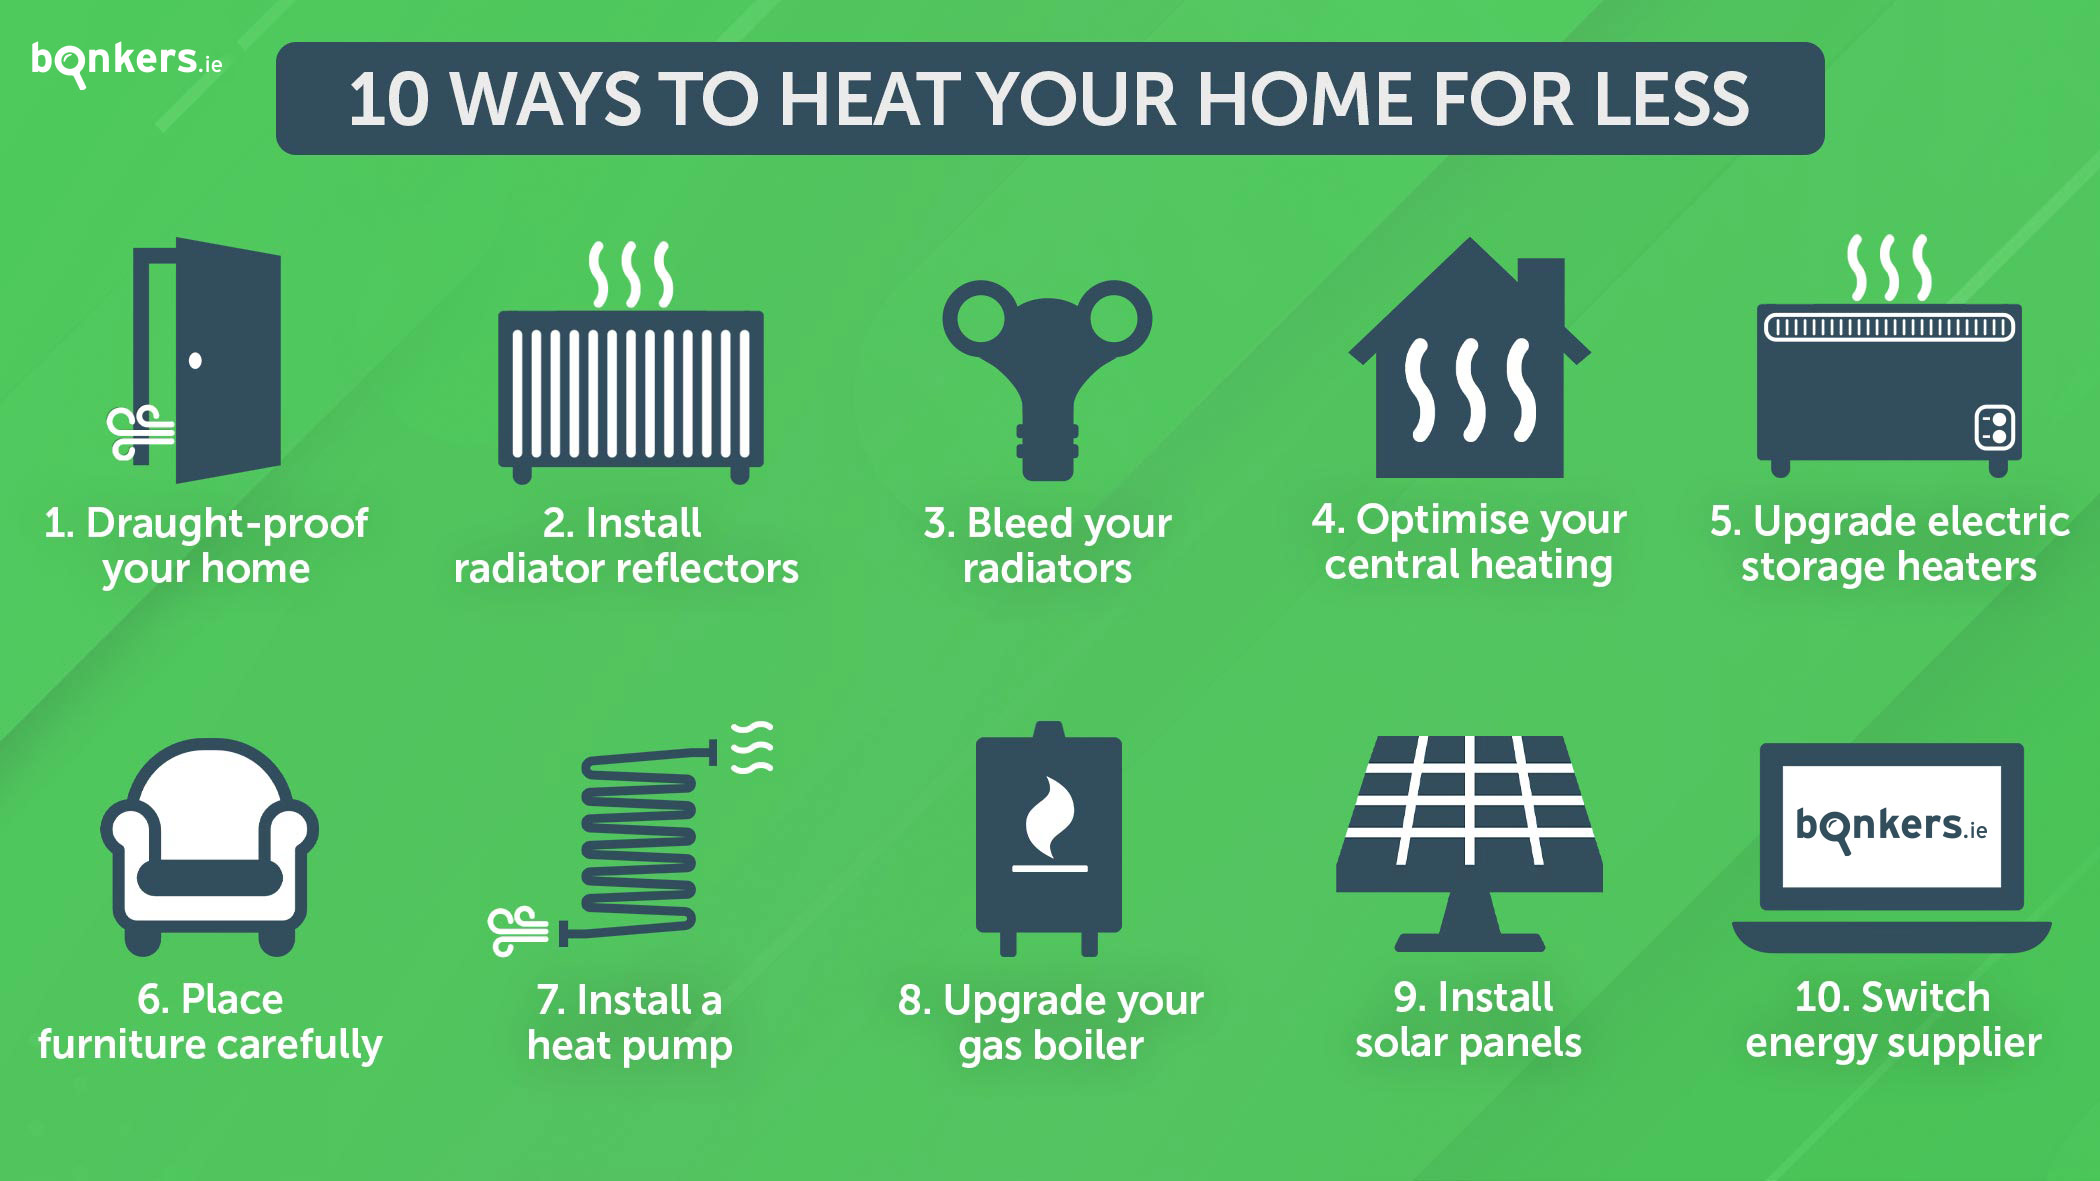 Cheapest Way to Heat a Home